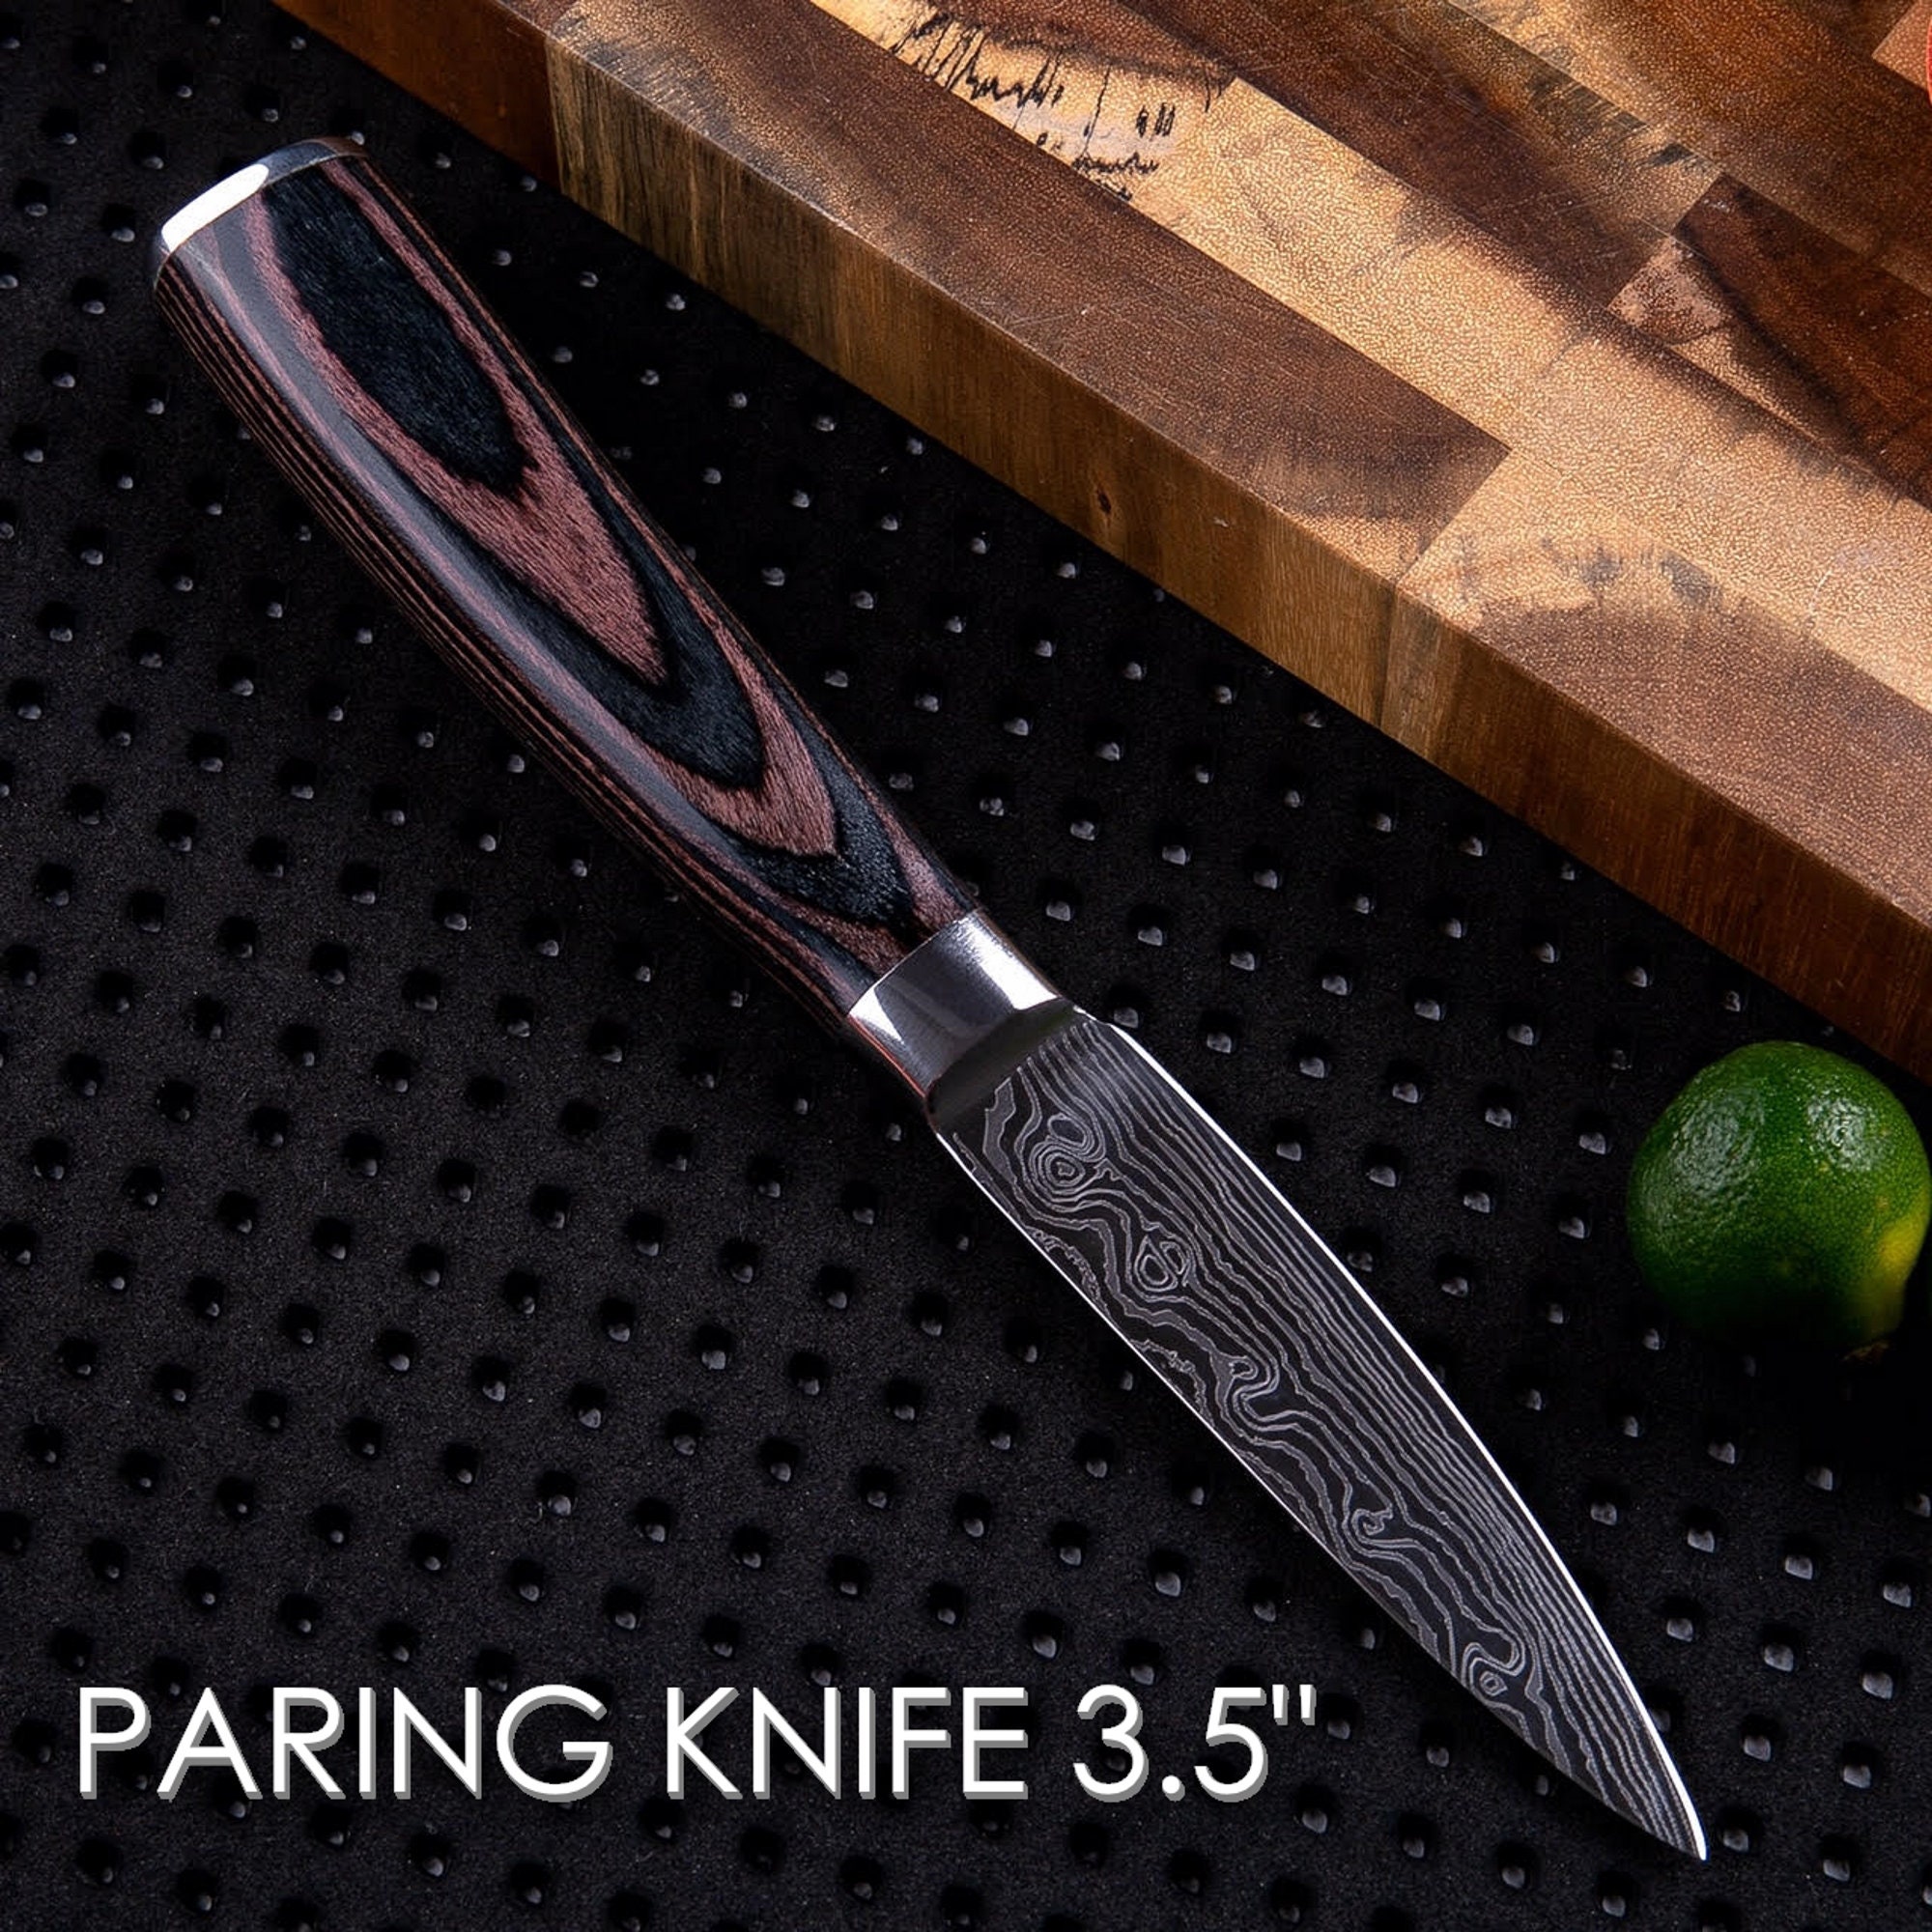 3.5 Paring Knife, The Frost Fire Series